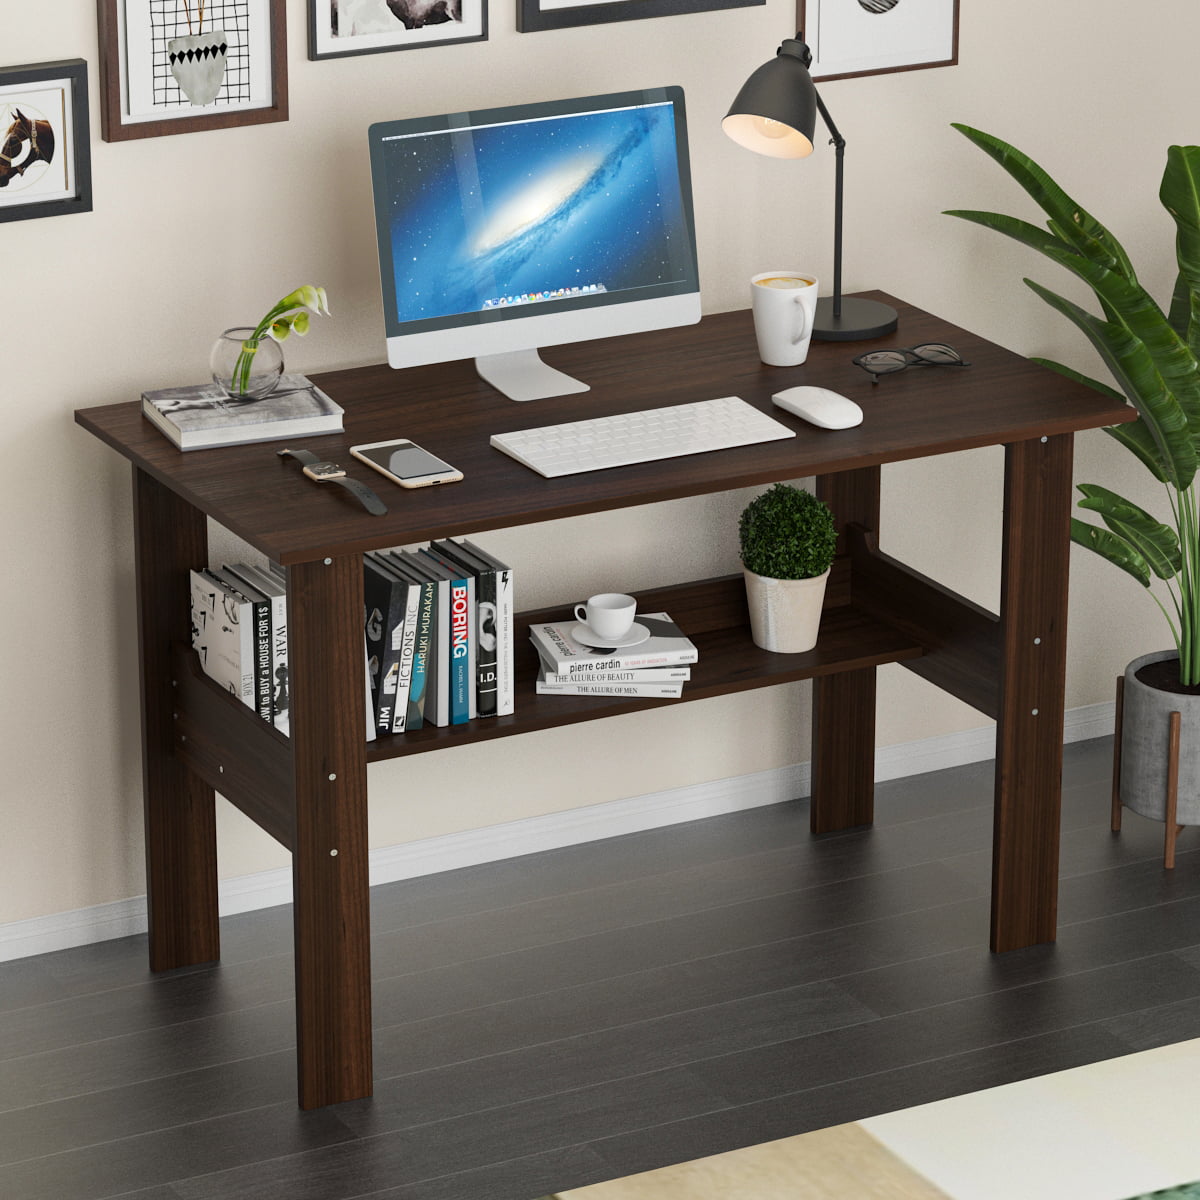 Details about   Computer Study Student Desk Laptop Table with Shelf Home Office Furniture Black 